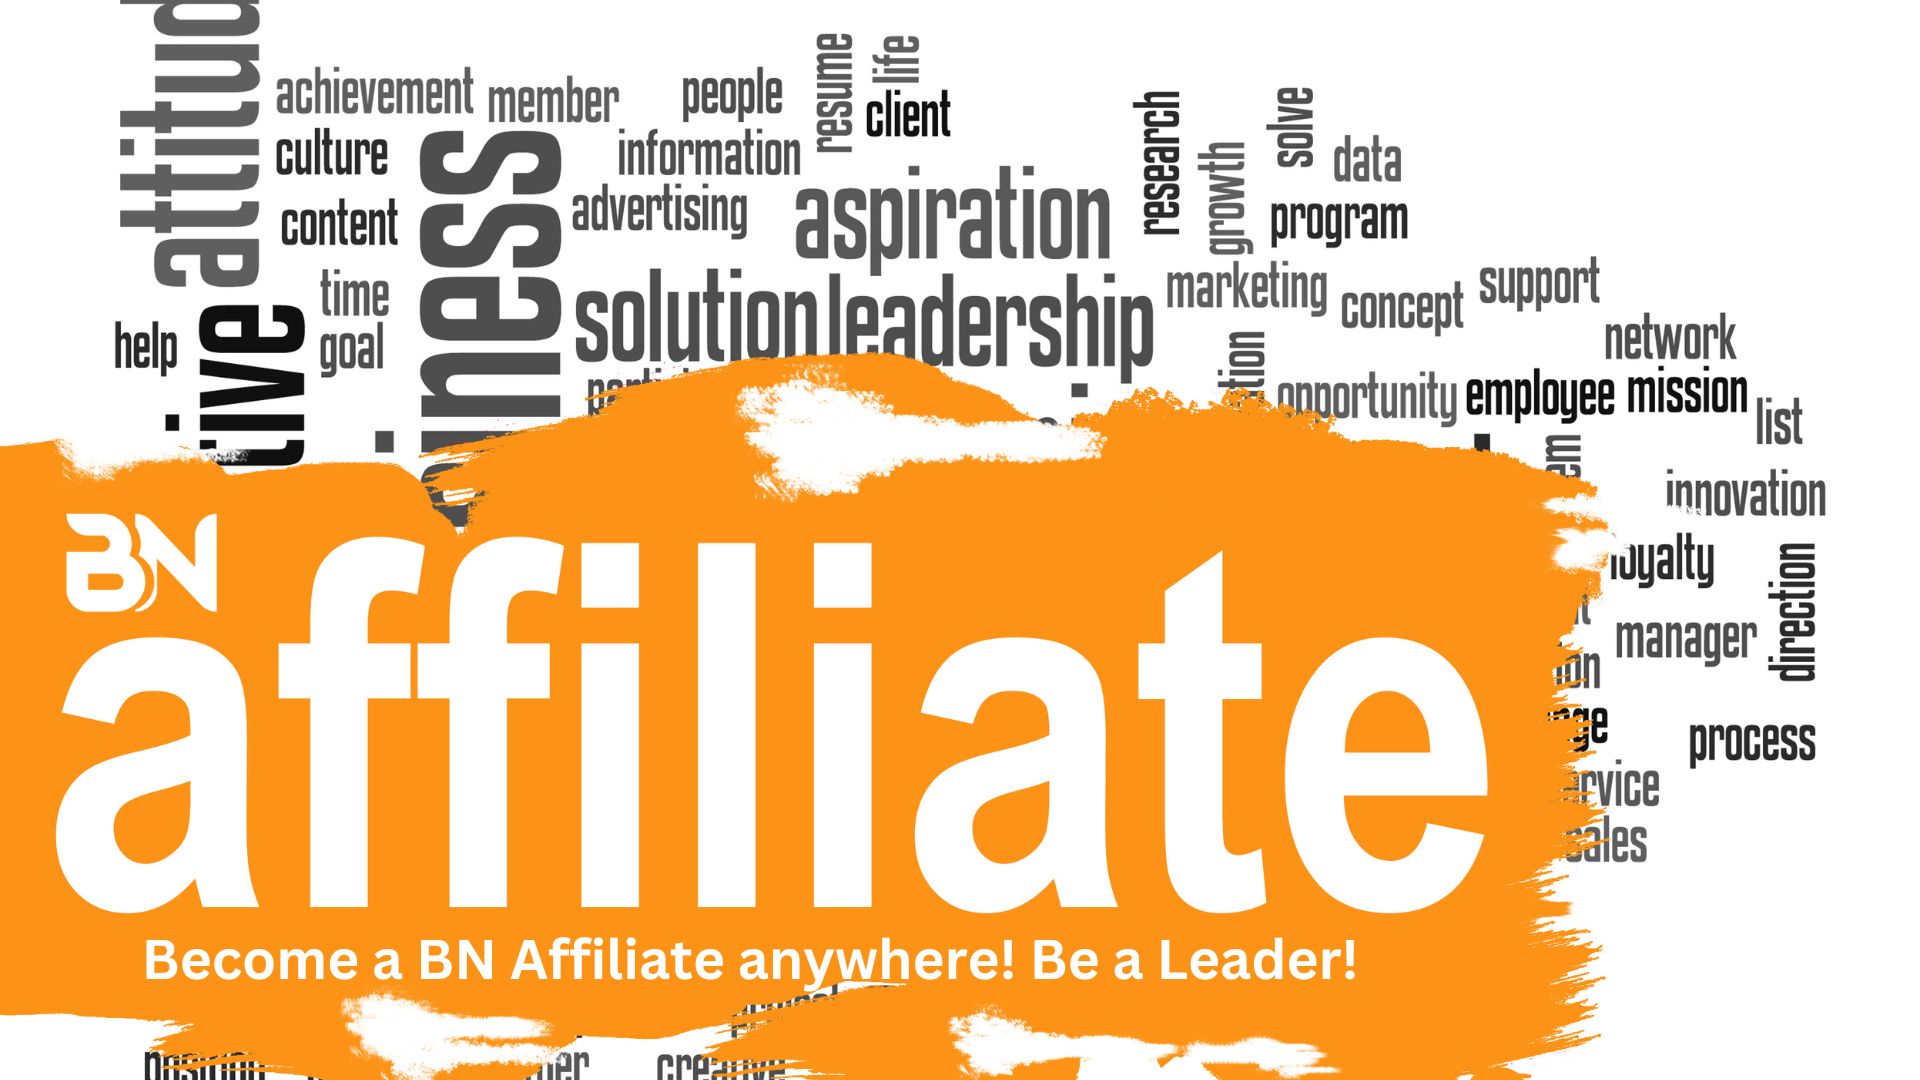 A BN Affiliate operates independently under the Best Neighbors Inc. umbrella. You want to lead a Best Neighbors Inc. group anywhere?